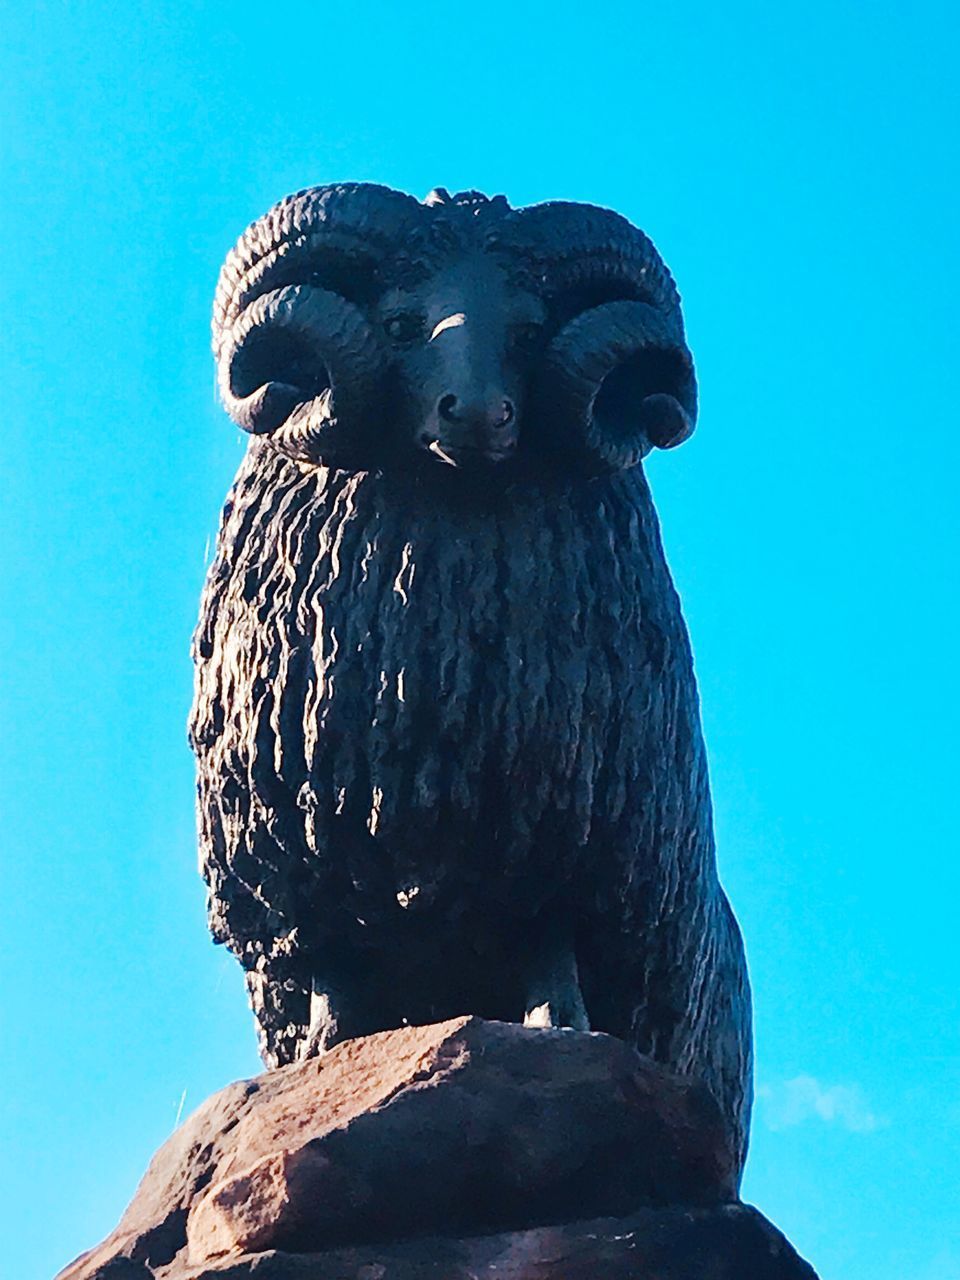 LOW ANGLE VIEW OF EAGLE STATUE